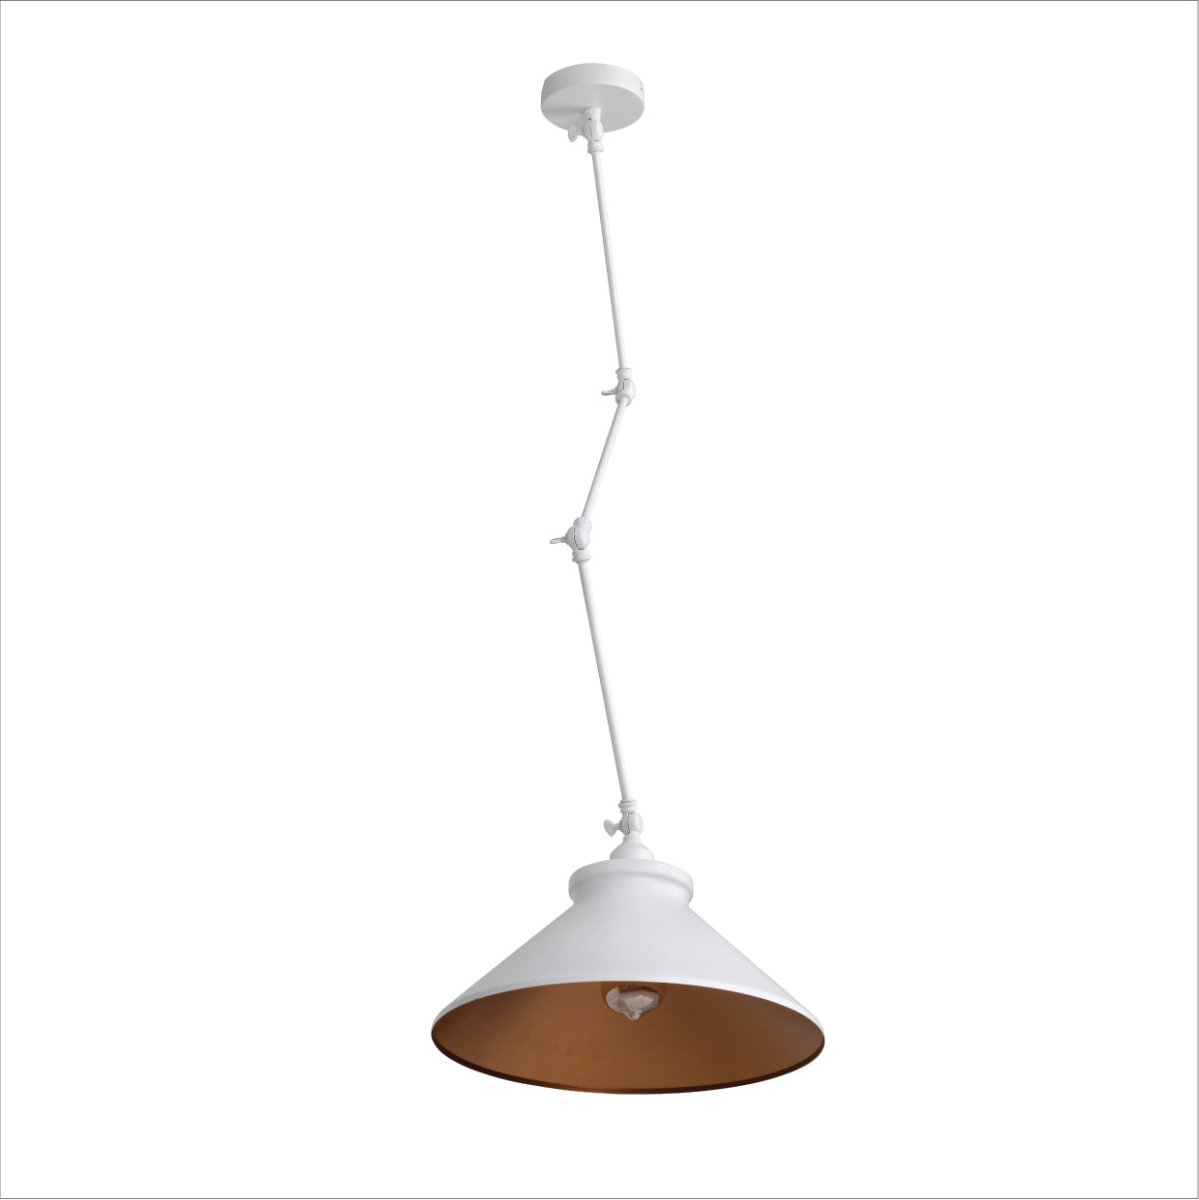 Main image of White Metal Hinged Funnel Ceiling Light with E27 Fitting | TEKLED 159-17042